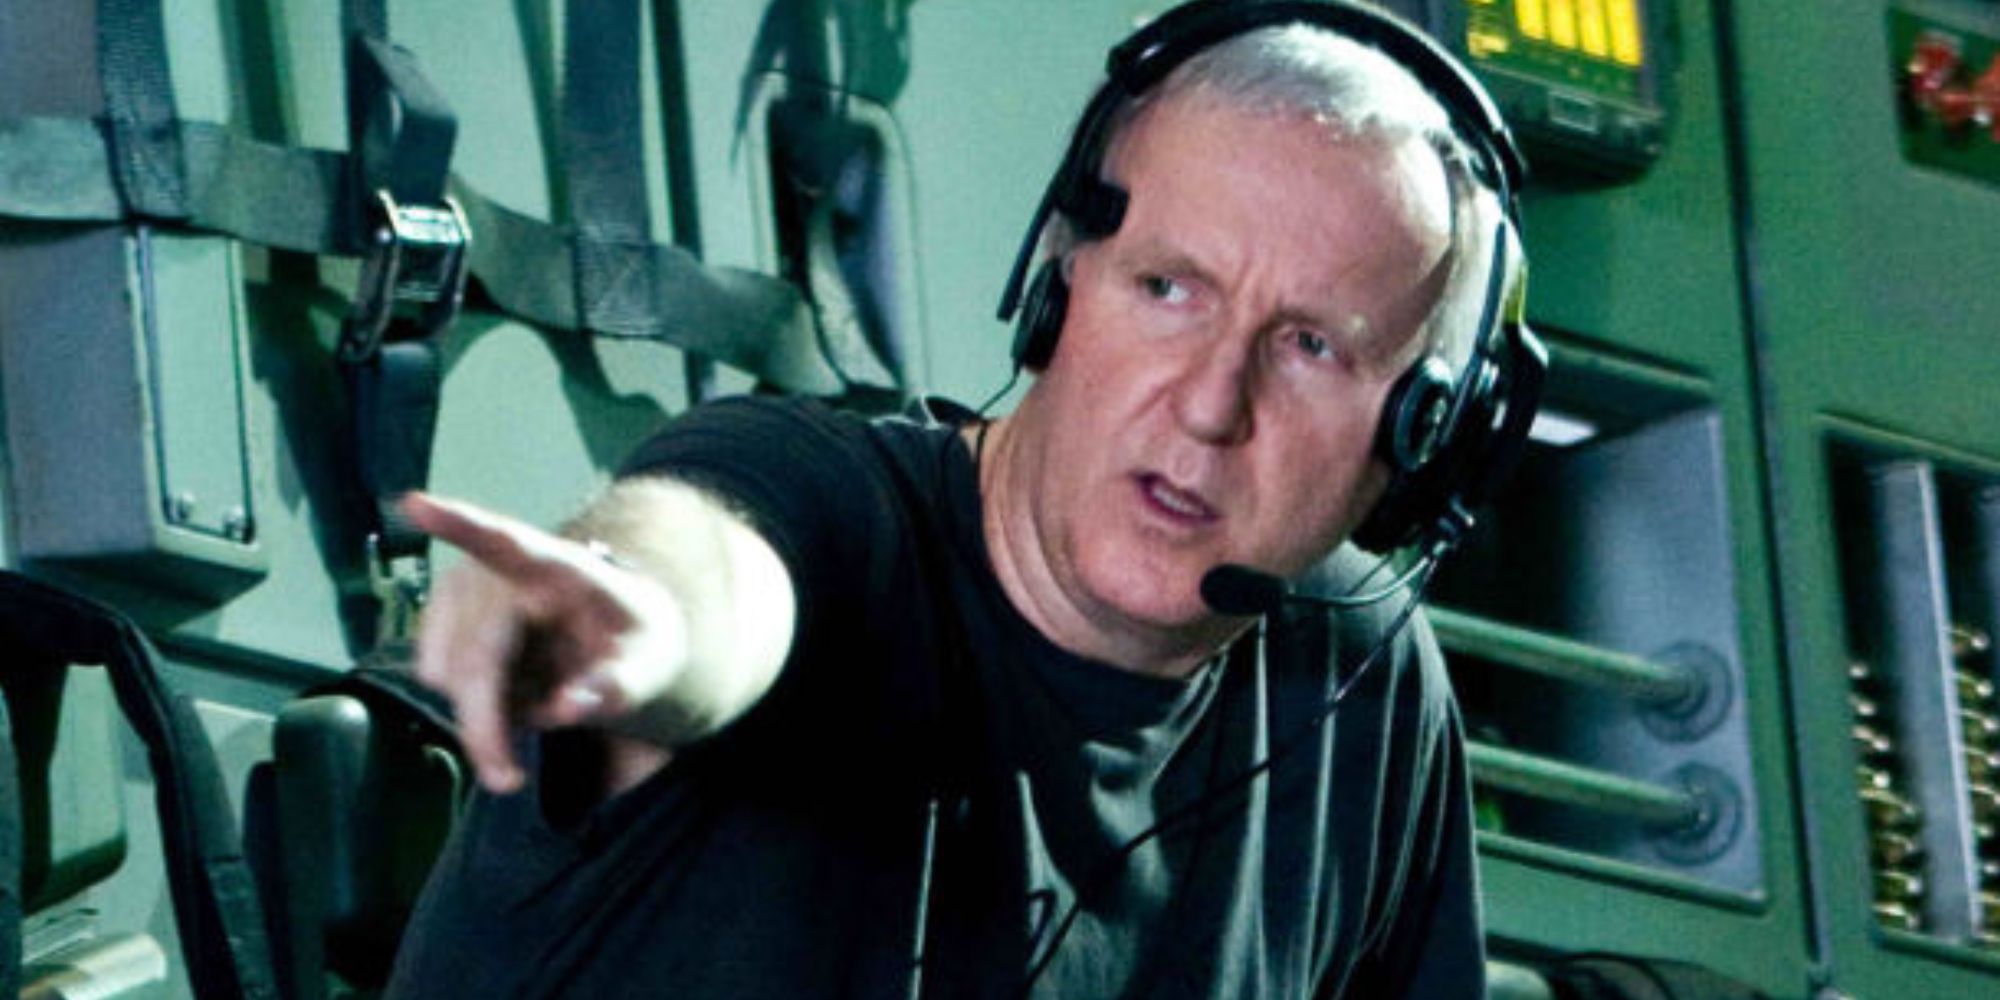 James Cameron on set of one of his films giving instructions.